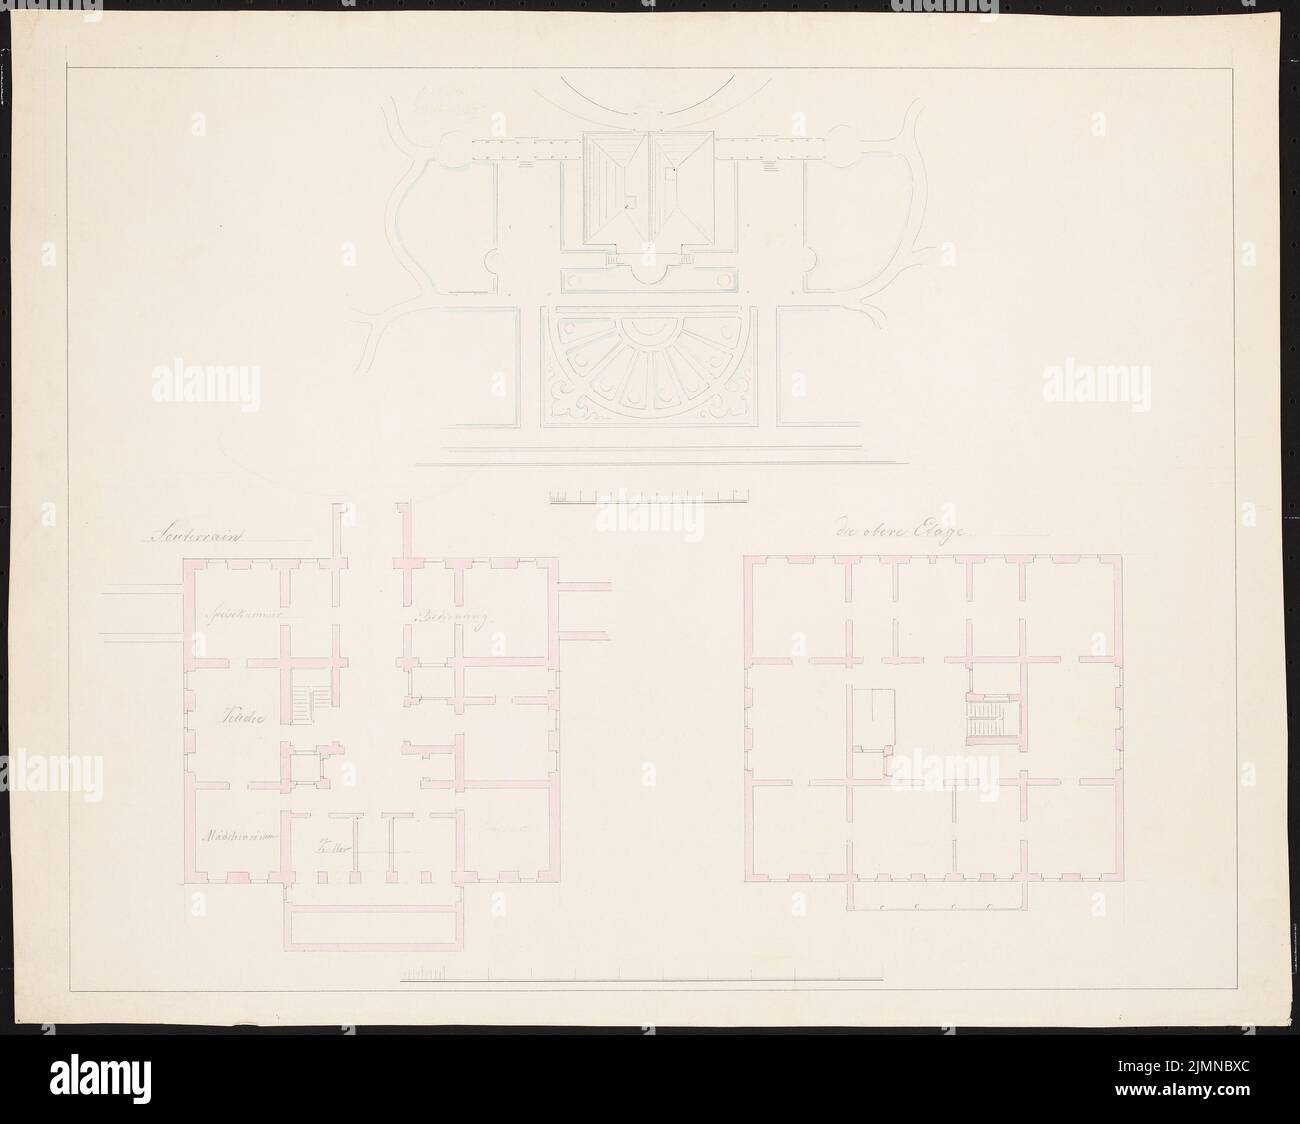 Knoblauch Eduard (1801-1865), villa (between 1836 and 1848): Villa on approximately square floor plan, nine-axle fronts, site plan, floor plans. Tusche watercolor, 47.7 x 60 cm (including scan edges) Stock Photo